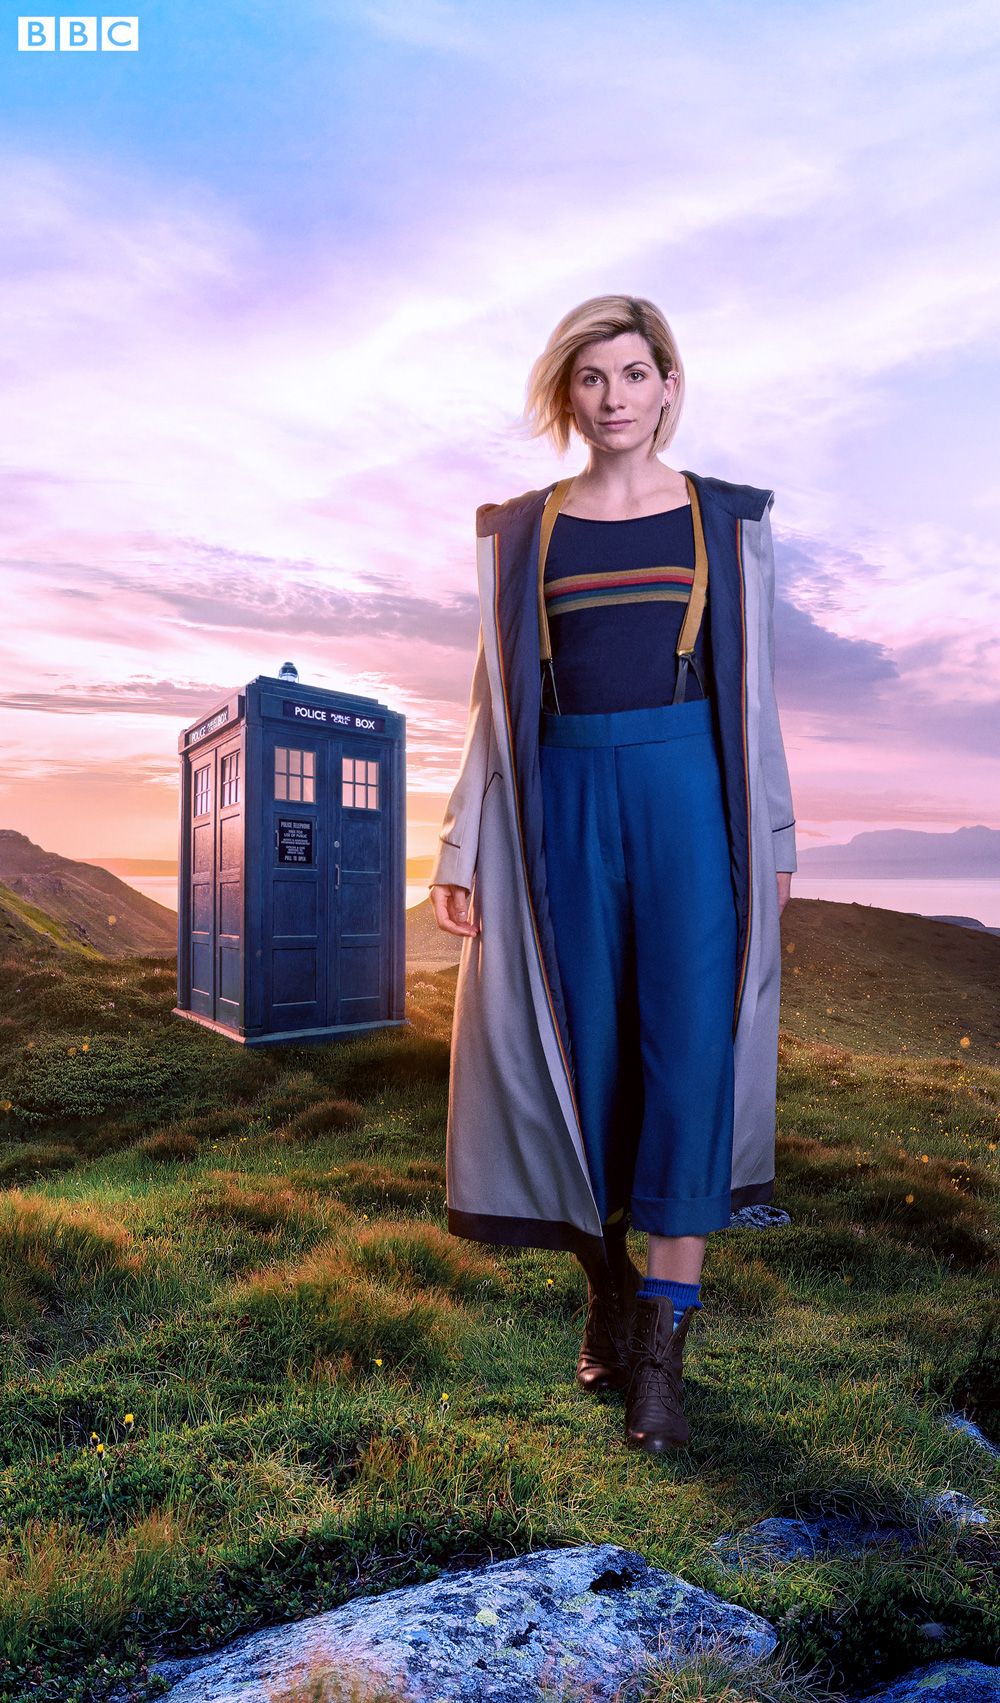 _jodie-whittaker-as-the-doctor-bbclogo_doctor-who_s11_costume-reveal.jpg